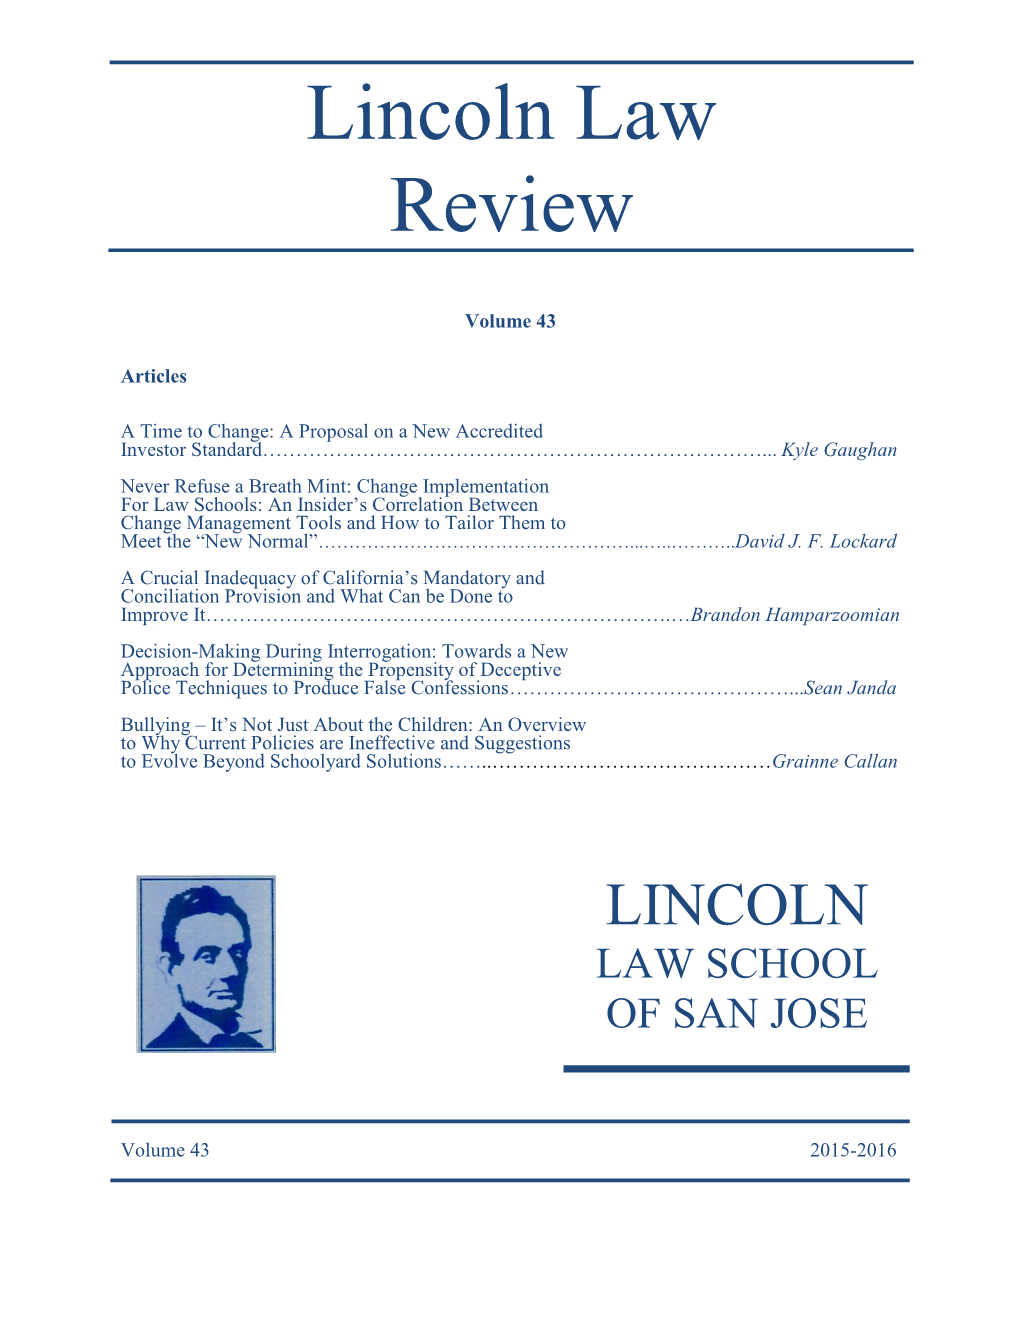 Lincoln Law Review